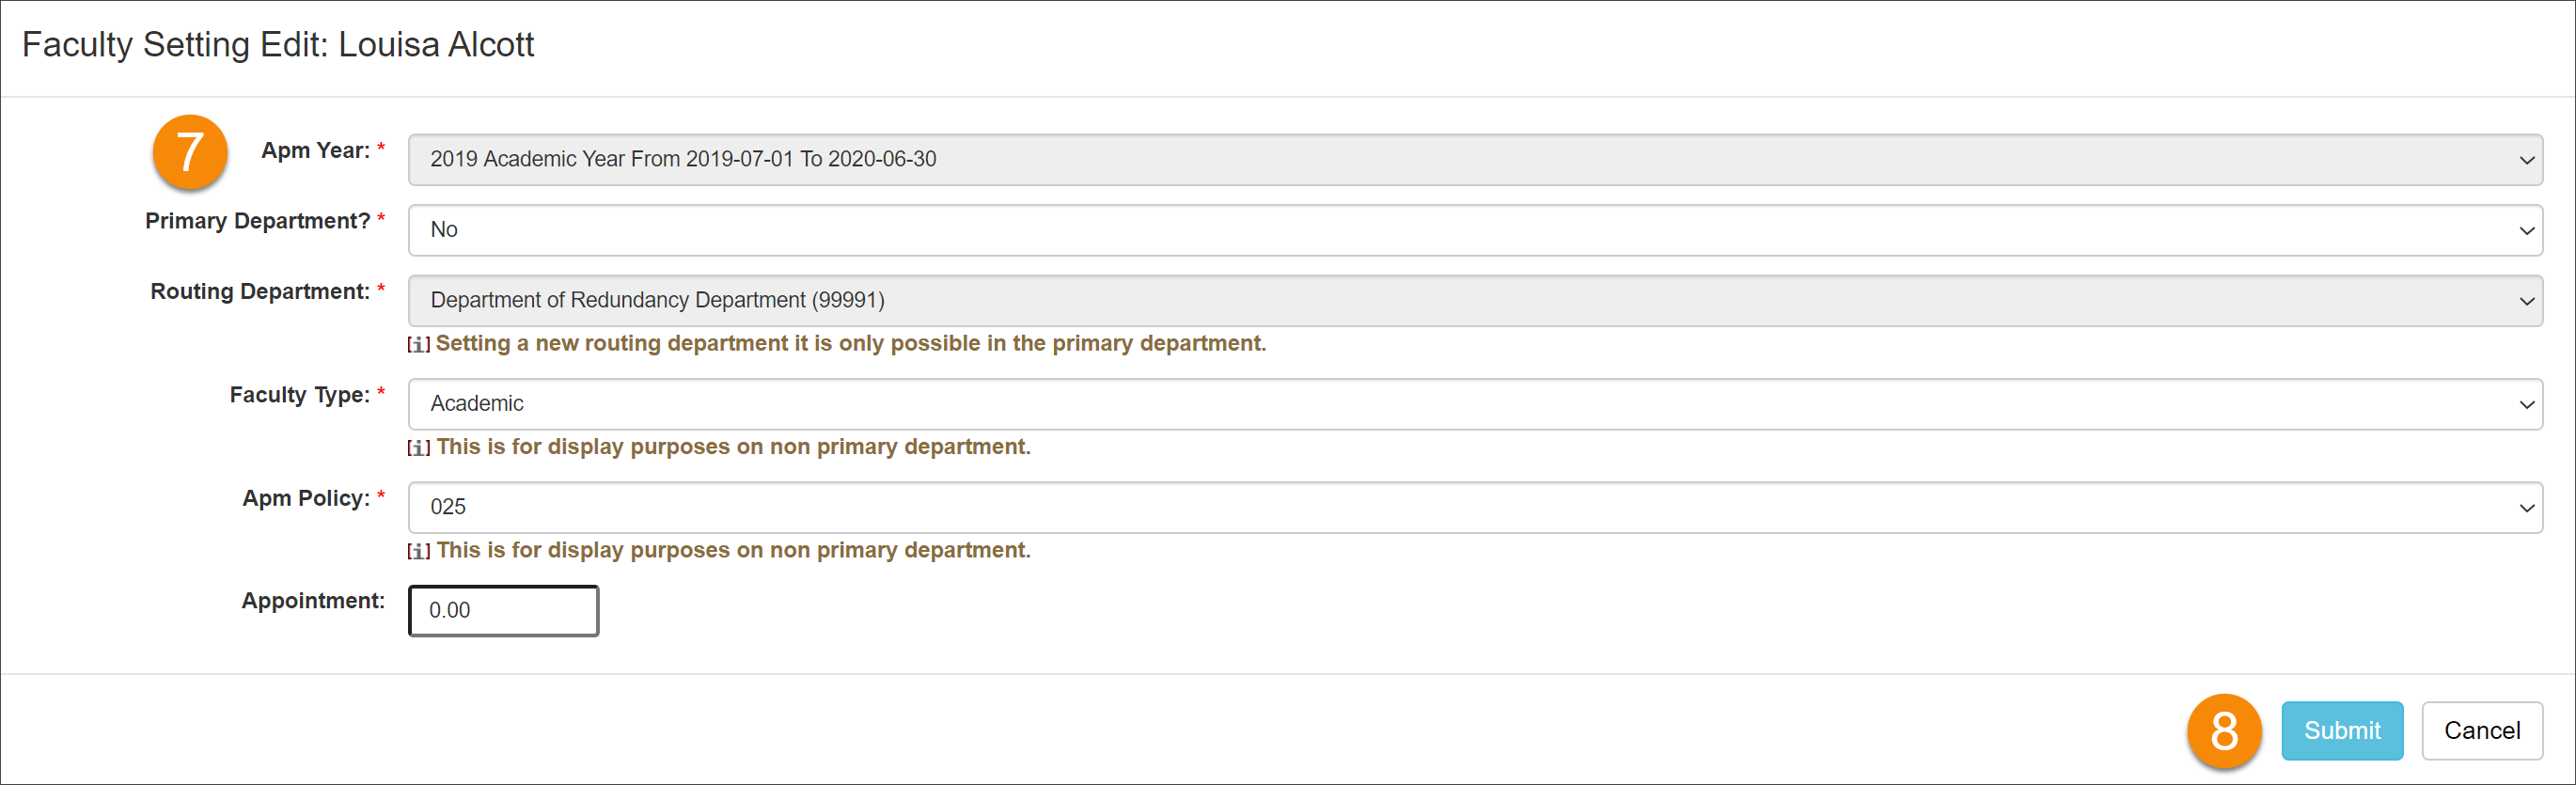 updating faculty settings form